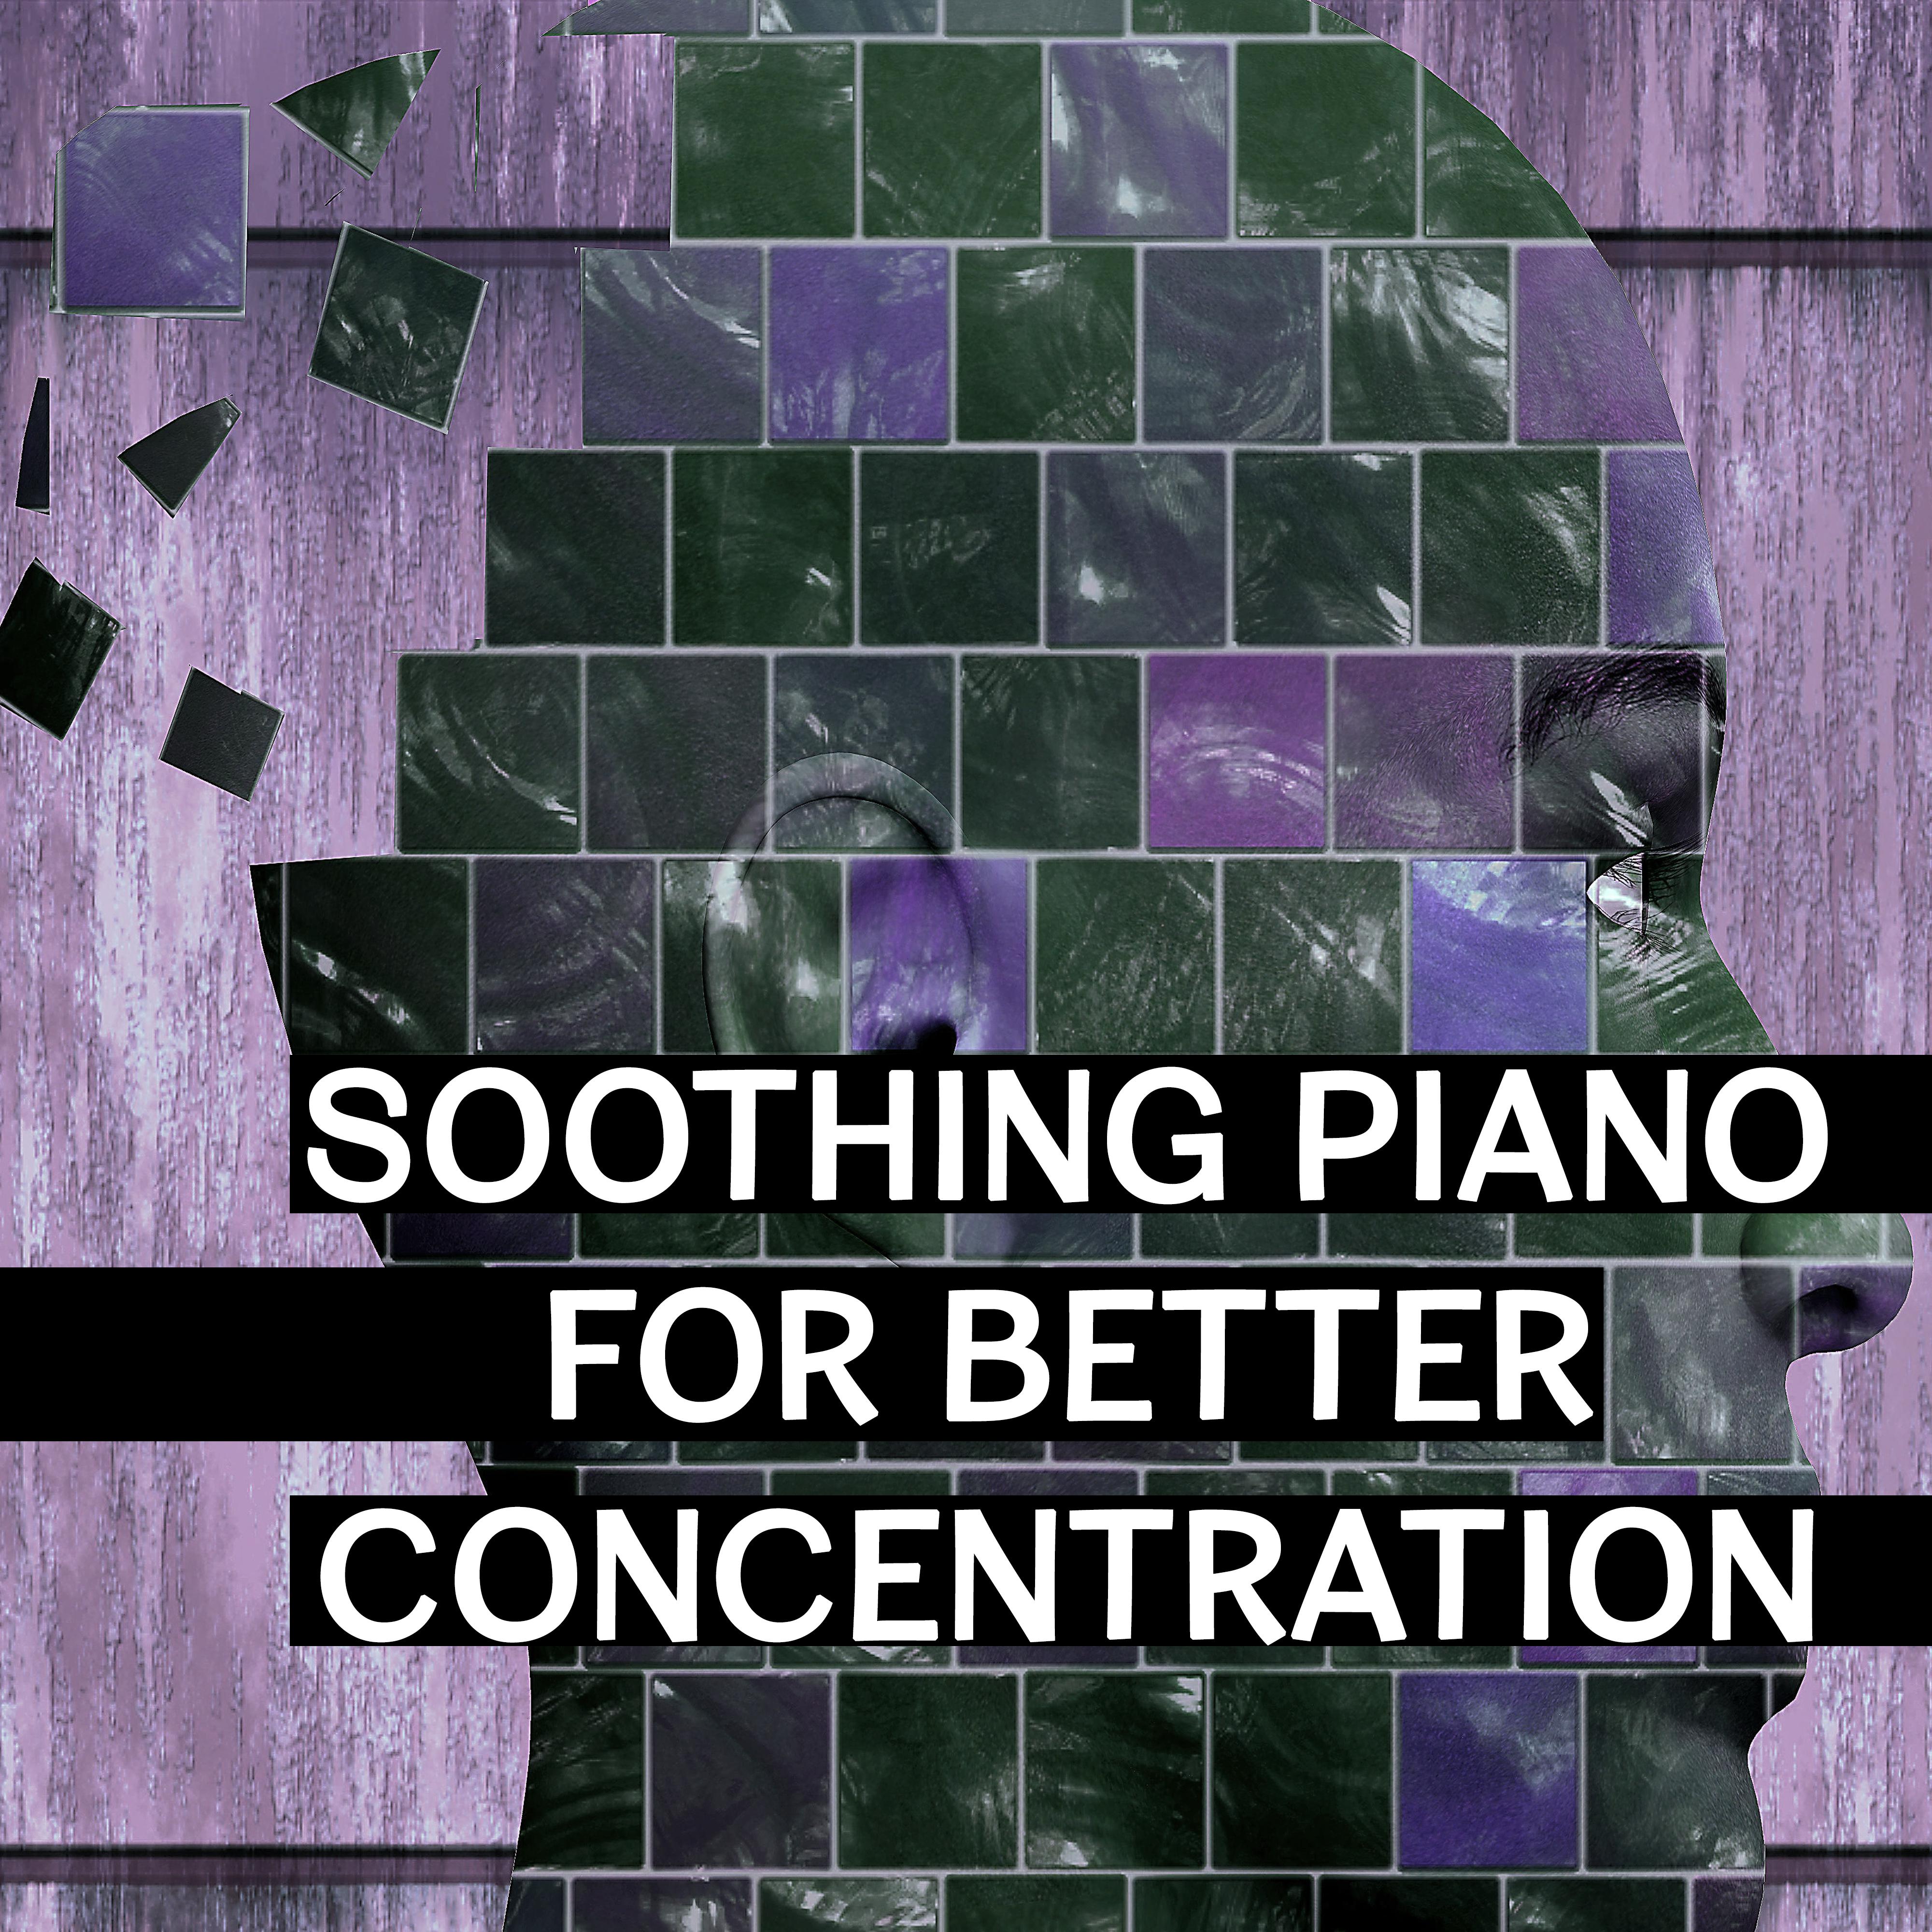 Soothing Piano for Better Concentration  Best New Age Music for Study, Brain Power, Development of Mind, Stress Relief